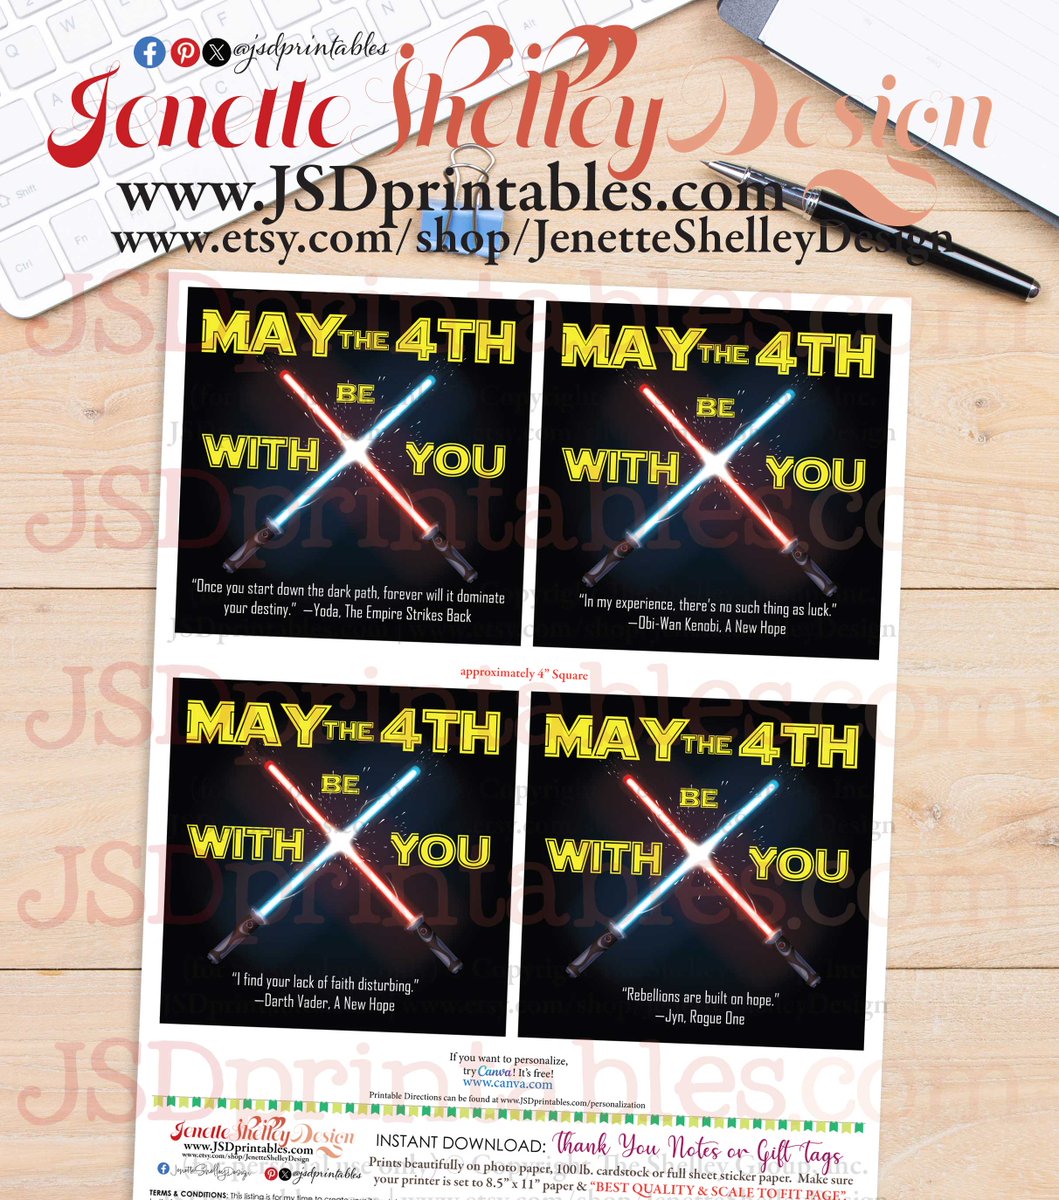 jsdprintables.com/product-page/m… May The 4th Be With You *Printable Gift Tags*
 jsdprintables.com/product-page/m… @jsdprintables #teachergifts #teachergifttags #instantdownload #teacherlife #gifts #giftsforteacher #loveateacher #teacherappreciation #MayThe4thBeWithYou #StarWars